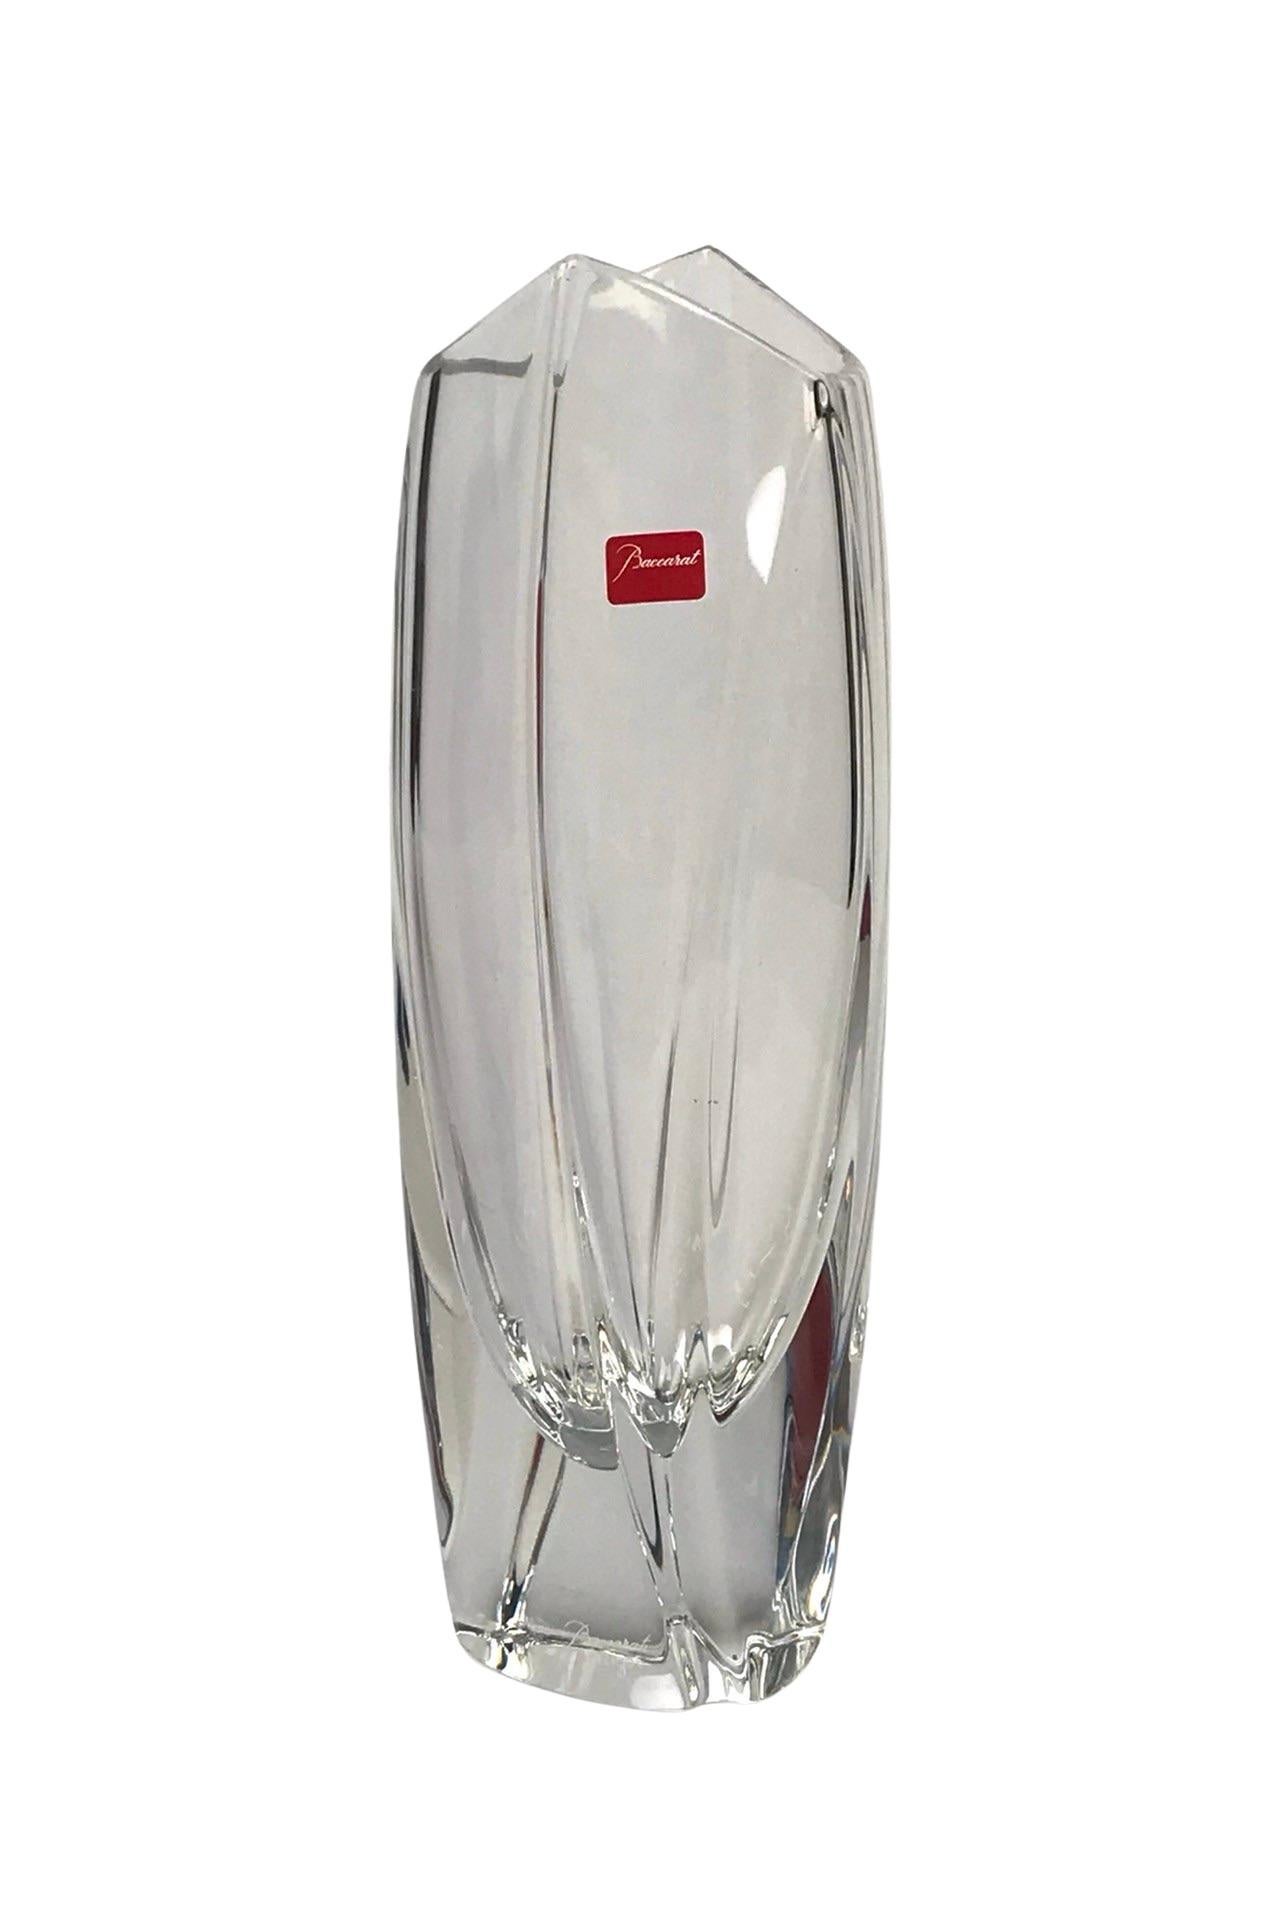 A wonderful Baccarat crystal vase, 6 sided.

An endless source of inspiration, this Baccarat vase is a timeless  ]classic.

Combining heritage and modernity, this vase brings a new interpretation. With its faceted shape, its cut facets and its